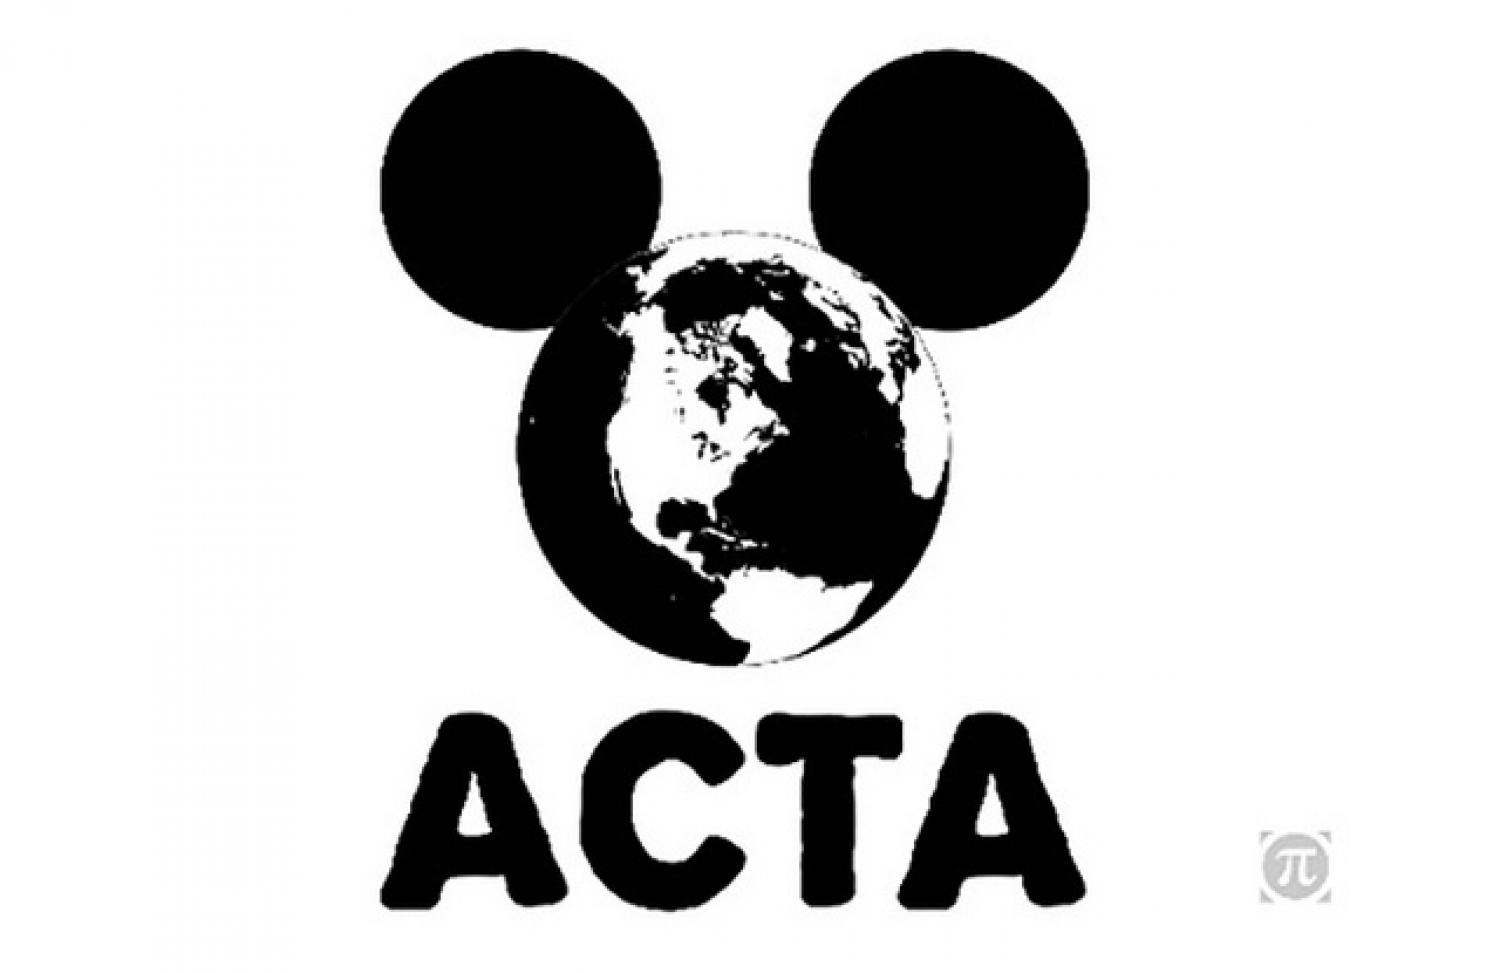 Why should I care about ACTA?